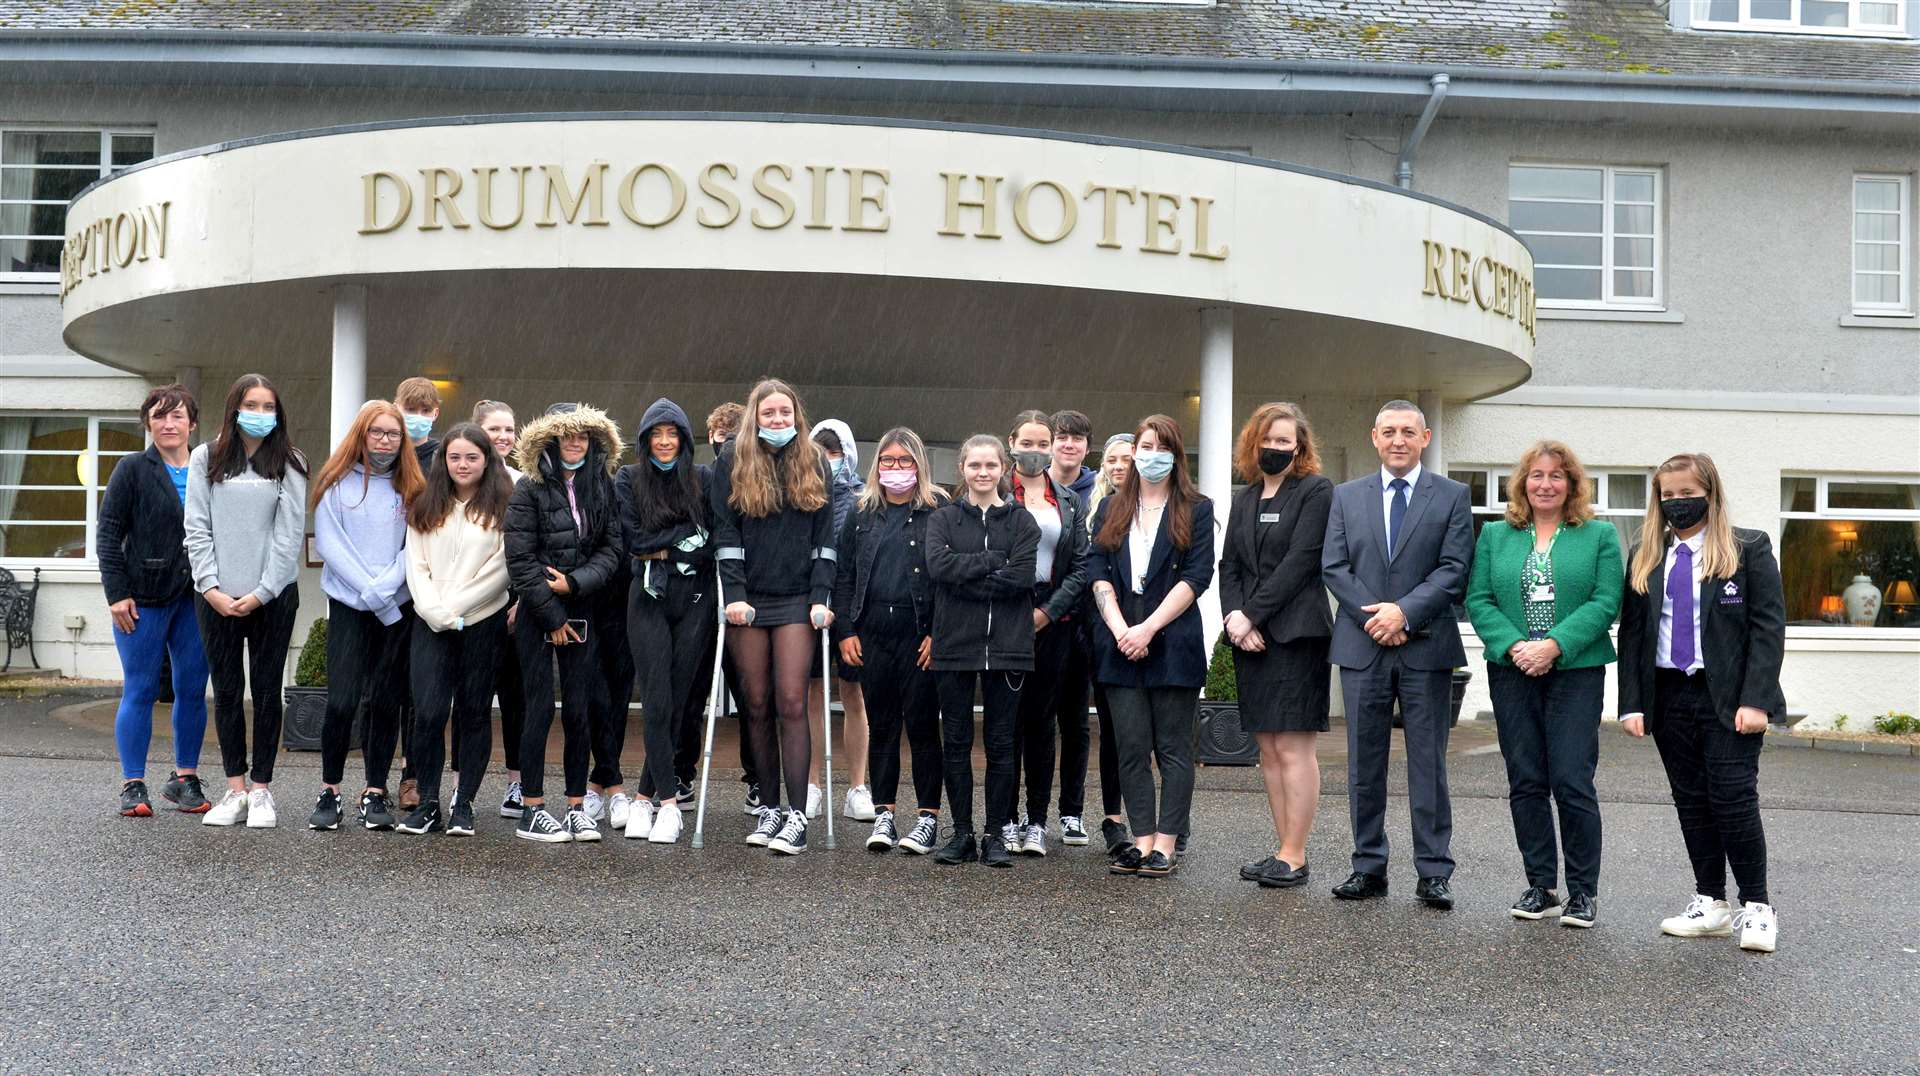 Pupils and staff from Culloden Academy with members of staff from the Drumossie Hotel. Picture: Callum Mackay